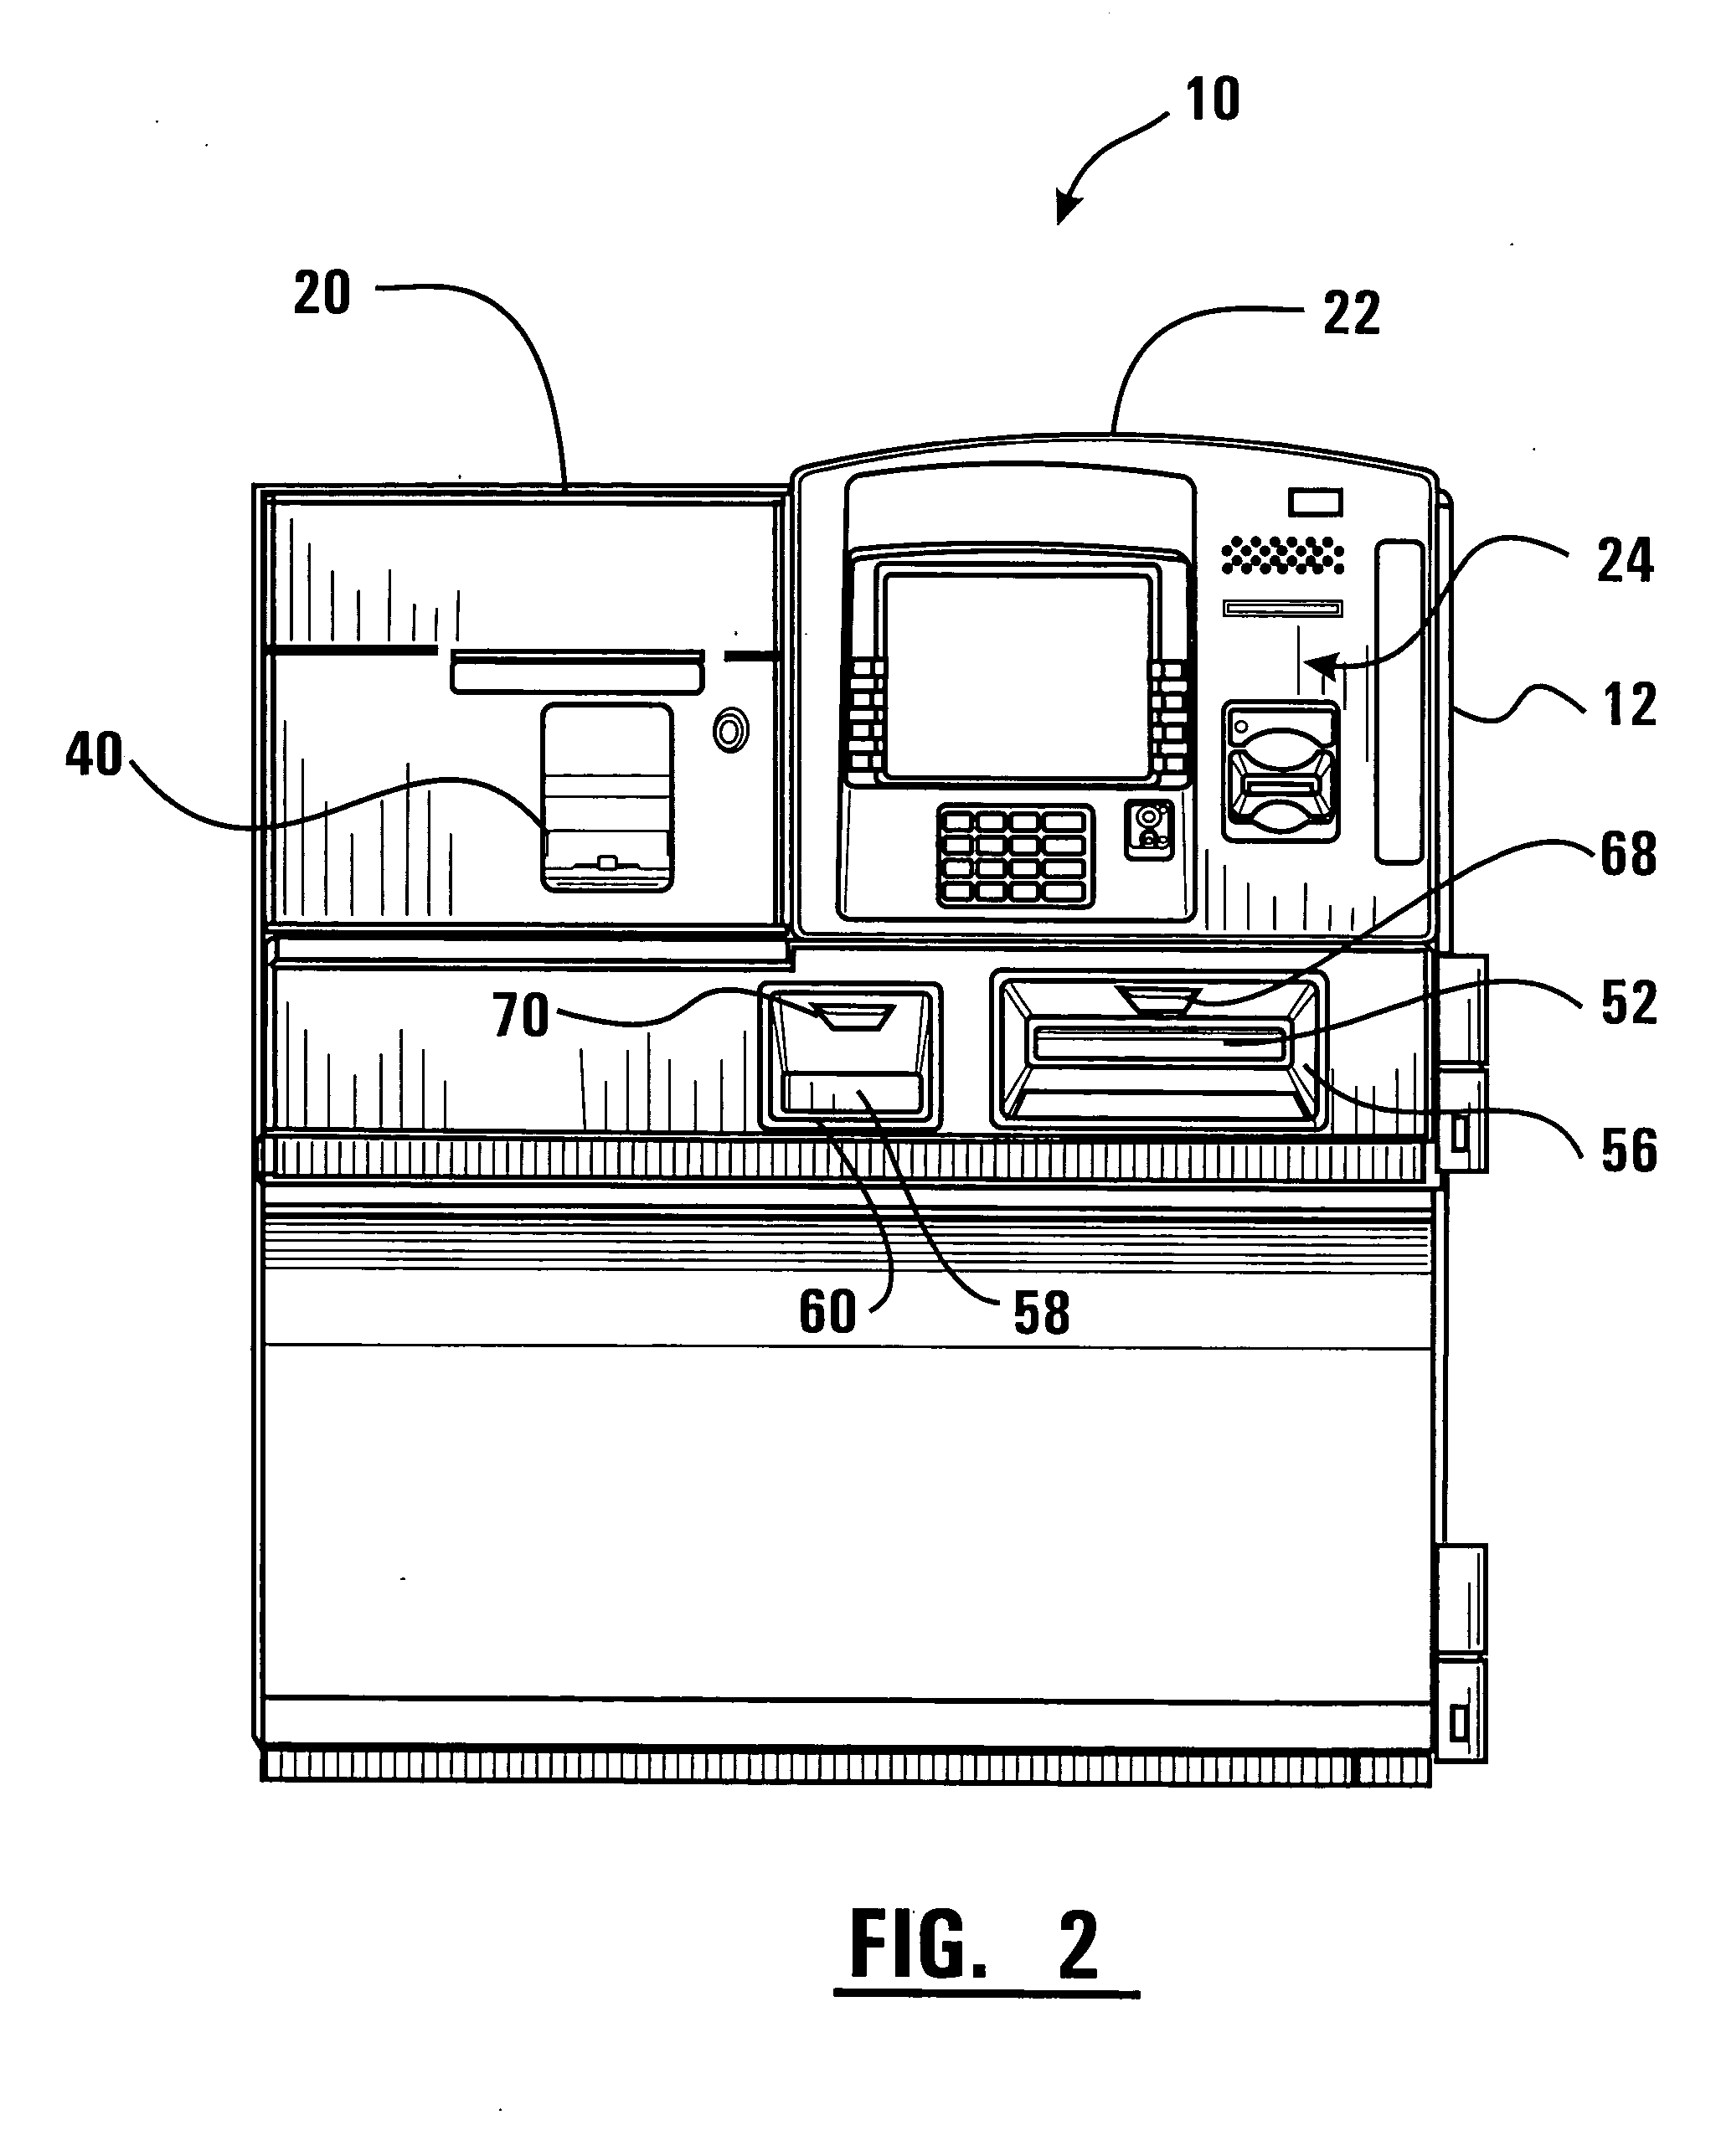 Cash dispensing automated banking machine diagnostic system